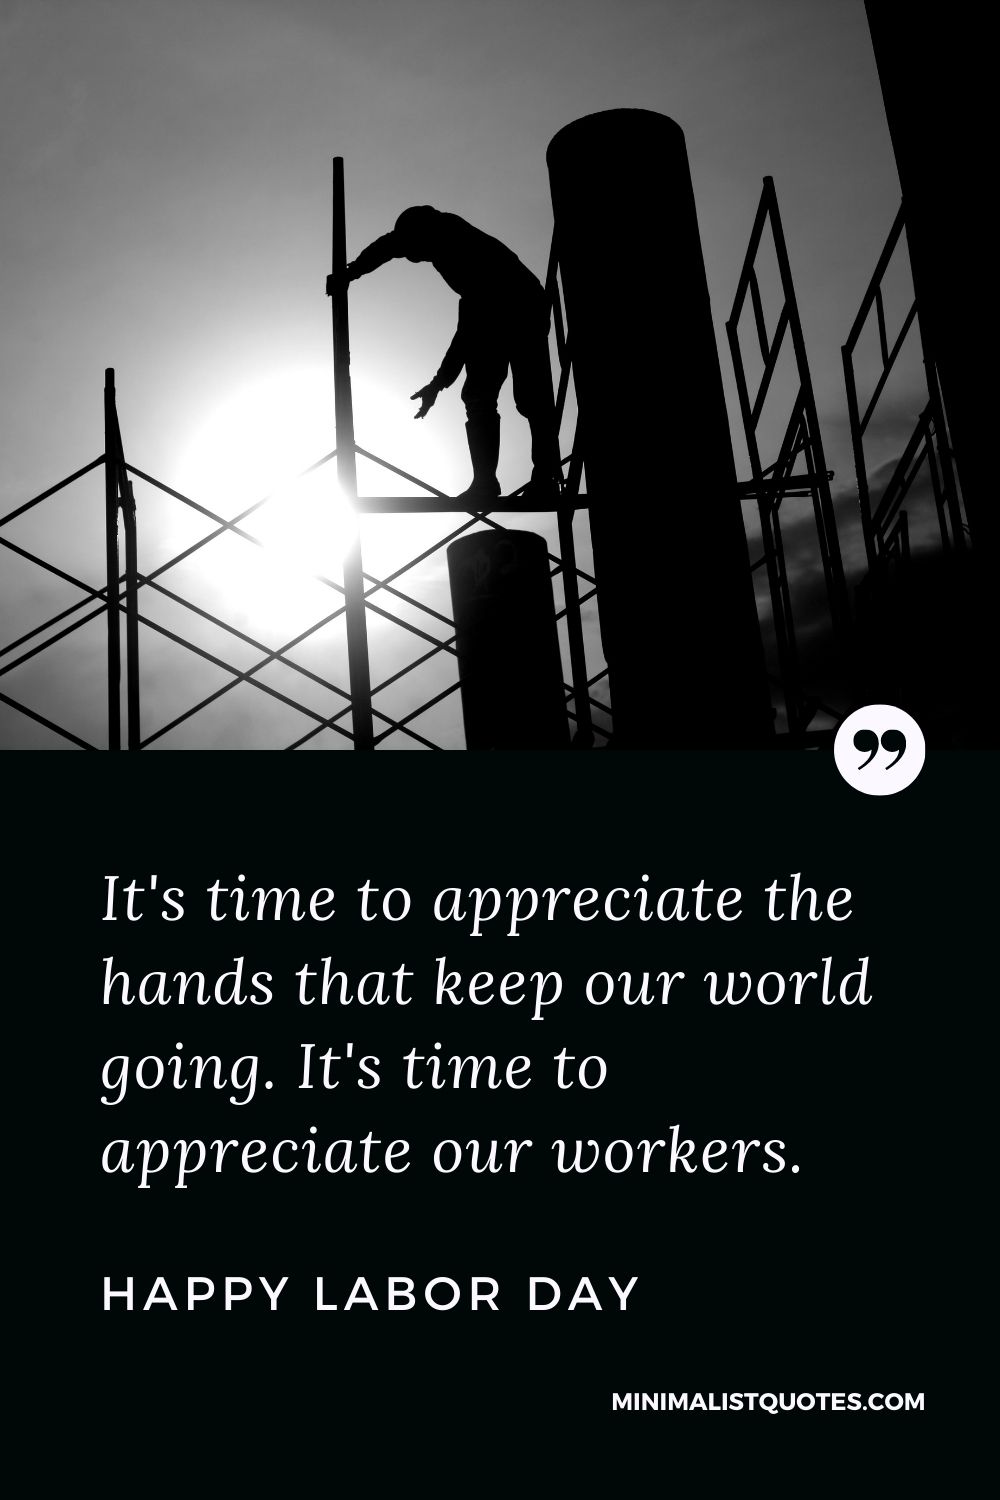 Labor day quote, wish & message with image: It's time to appreciate the hands that keep our world going. It's time to appreciate our workers. Happy Labor Day!